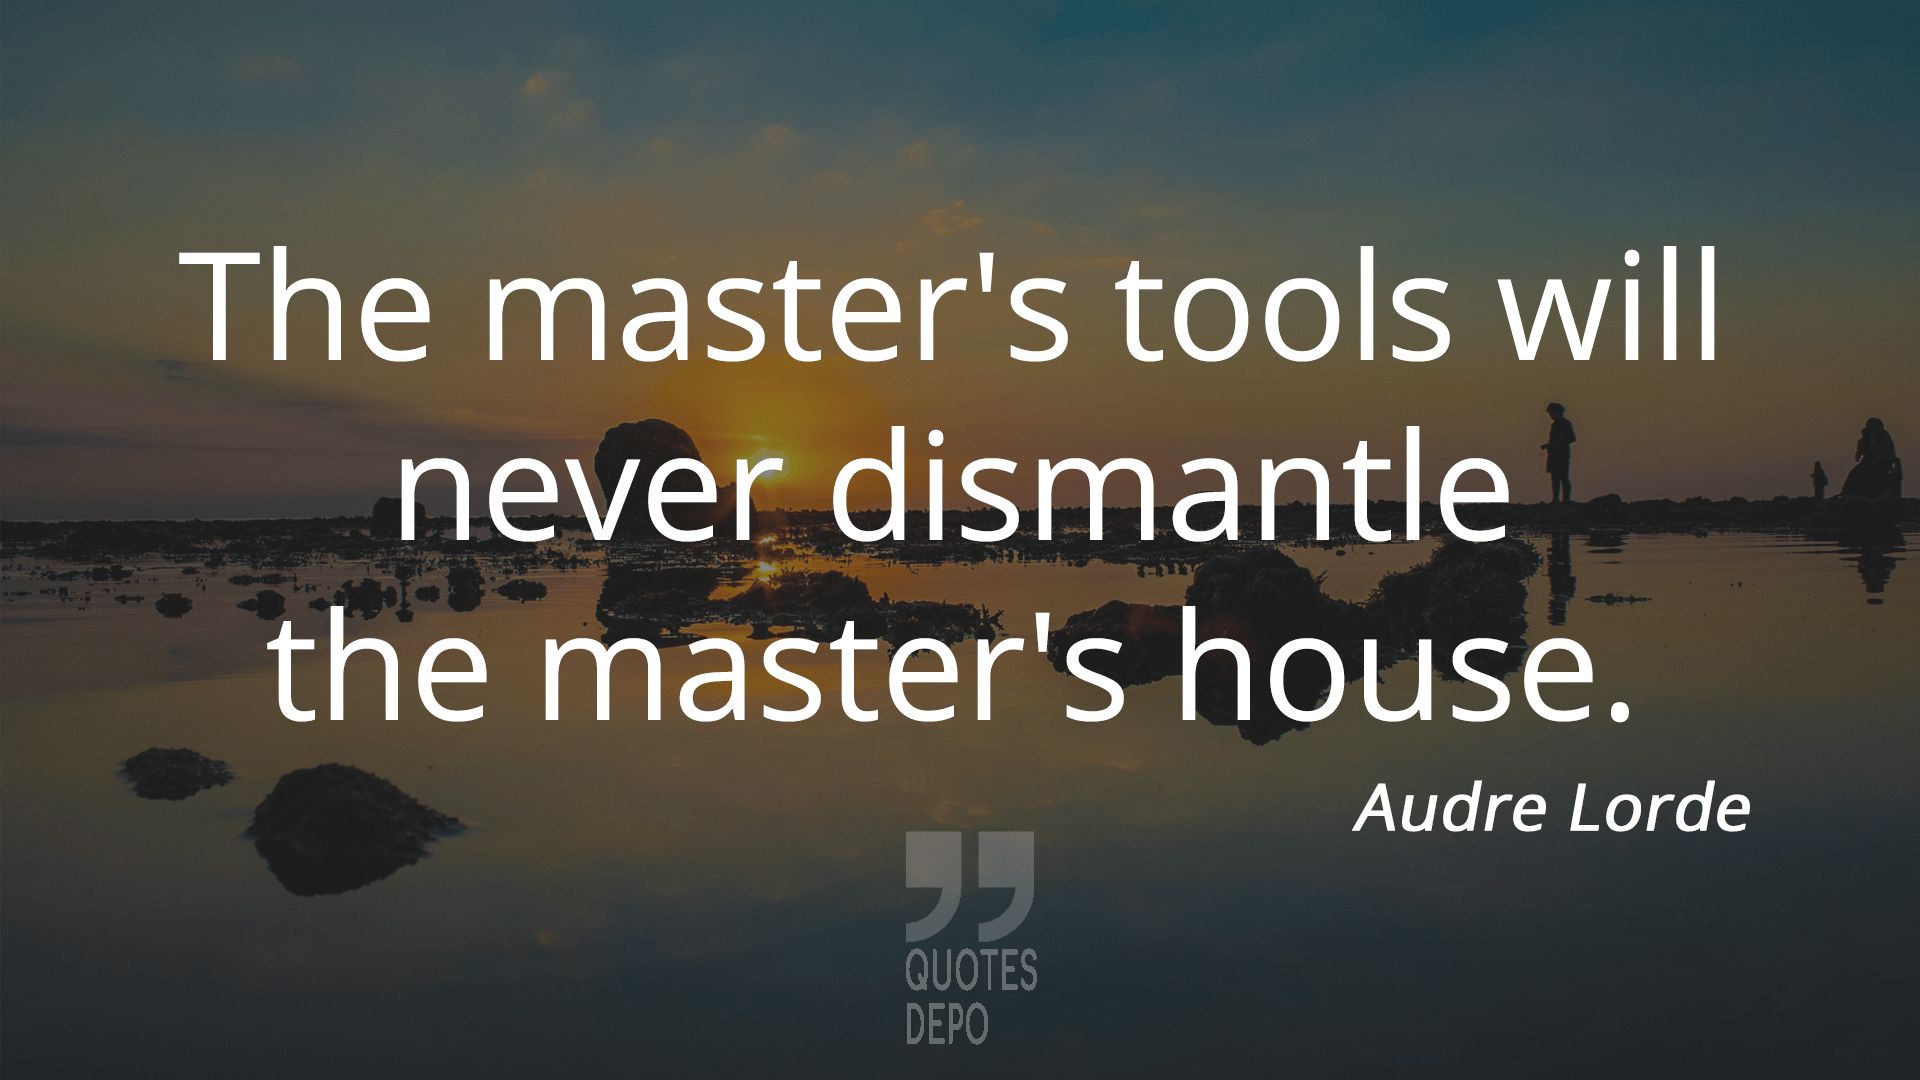 the master's tools will never dismantle the master's house - audre lorde quotes